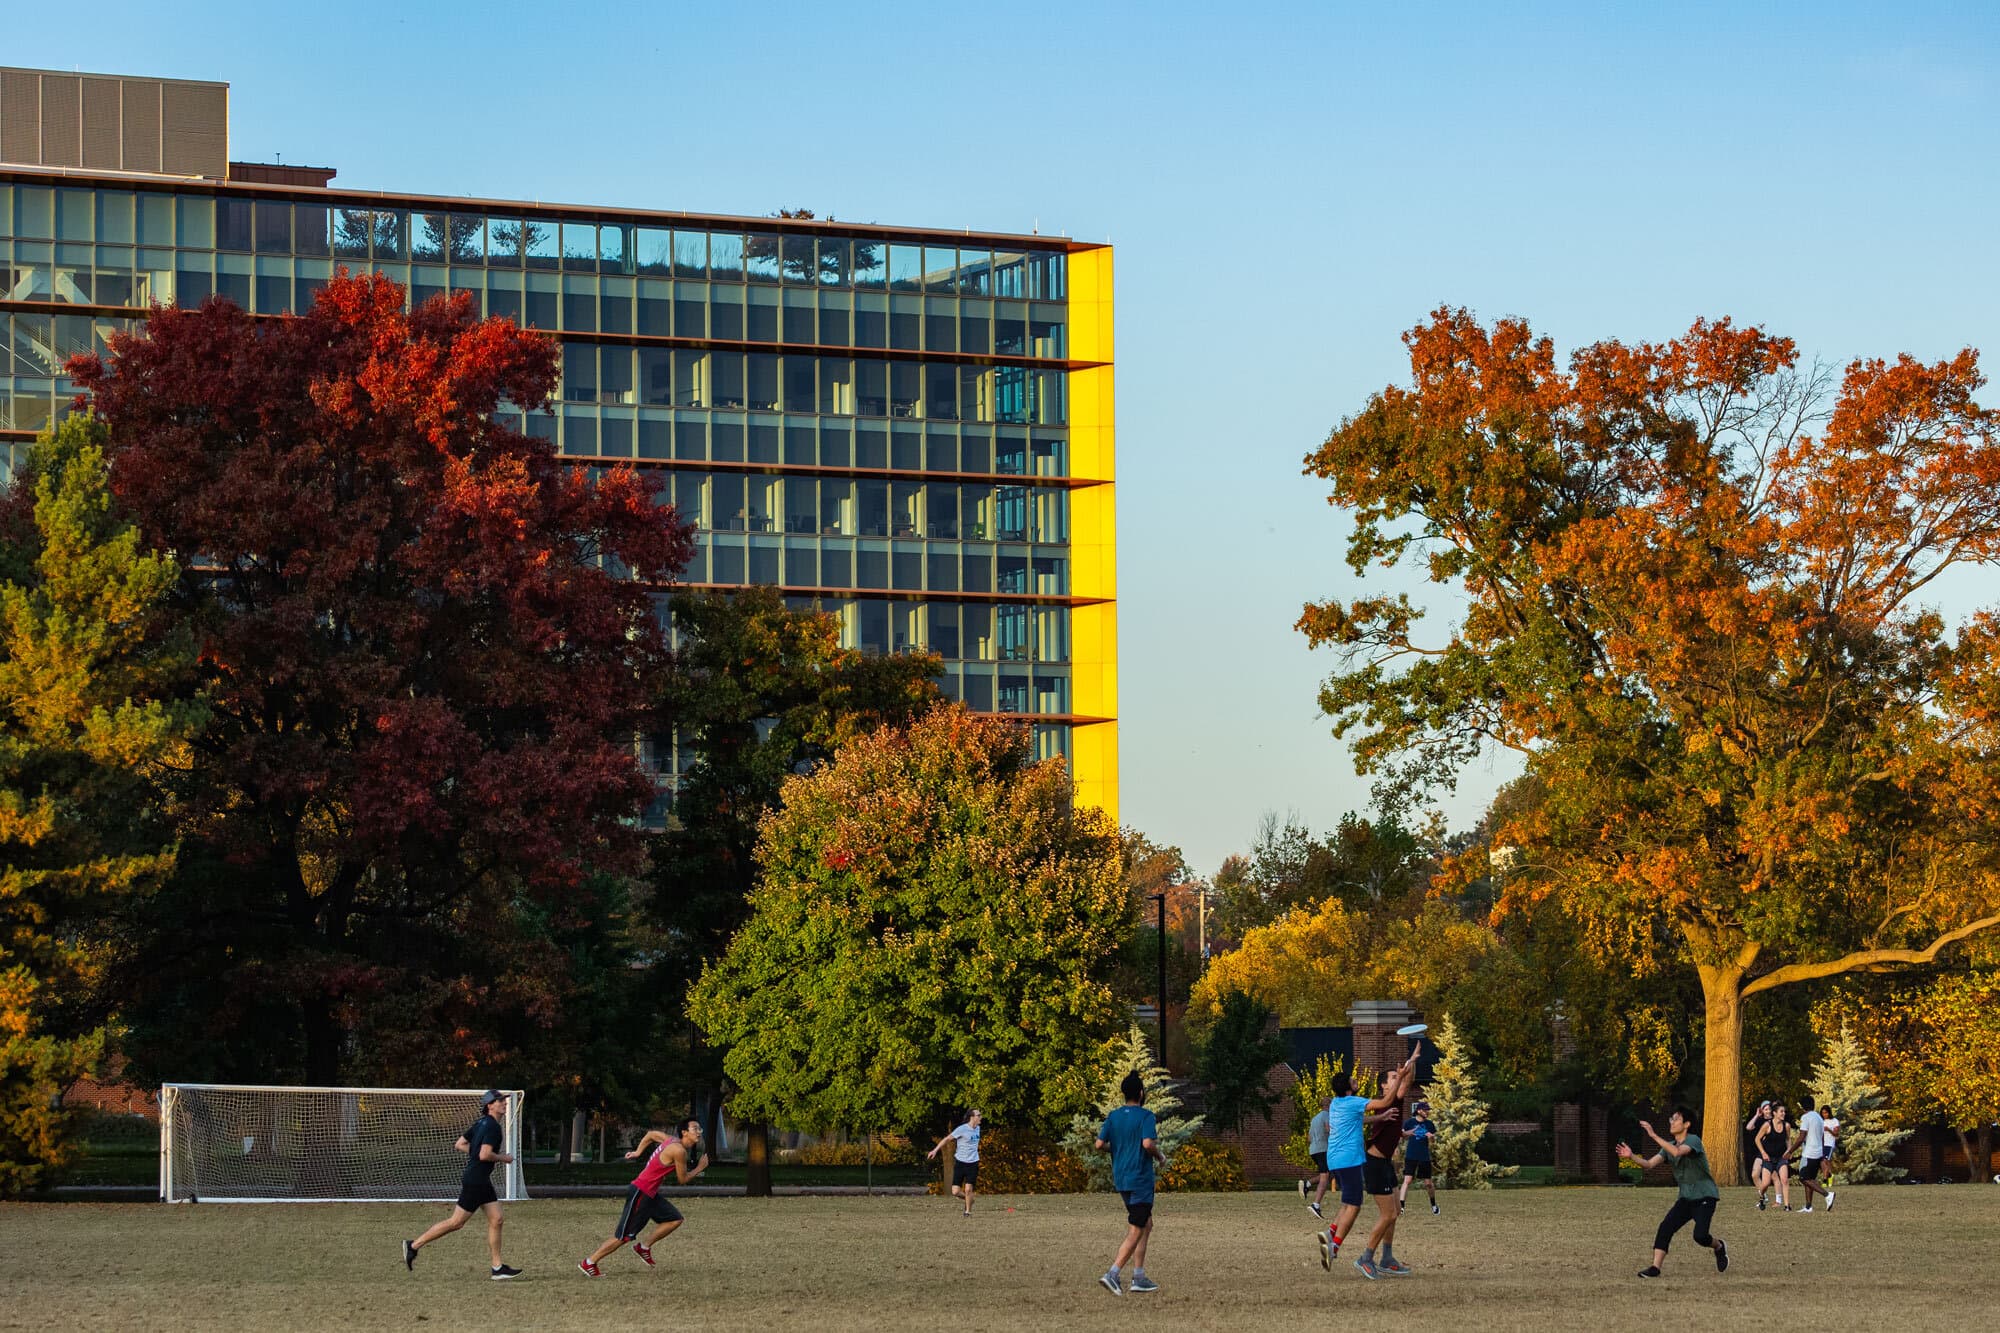 students play frisbee on a field with a building in the background